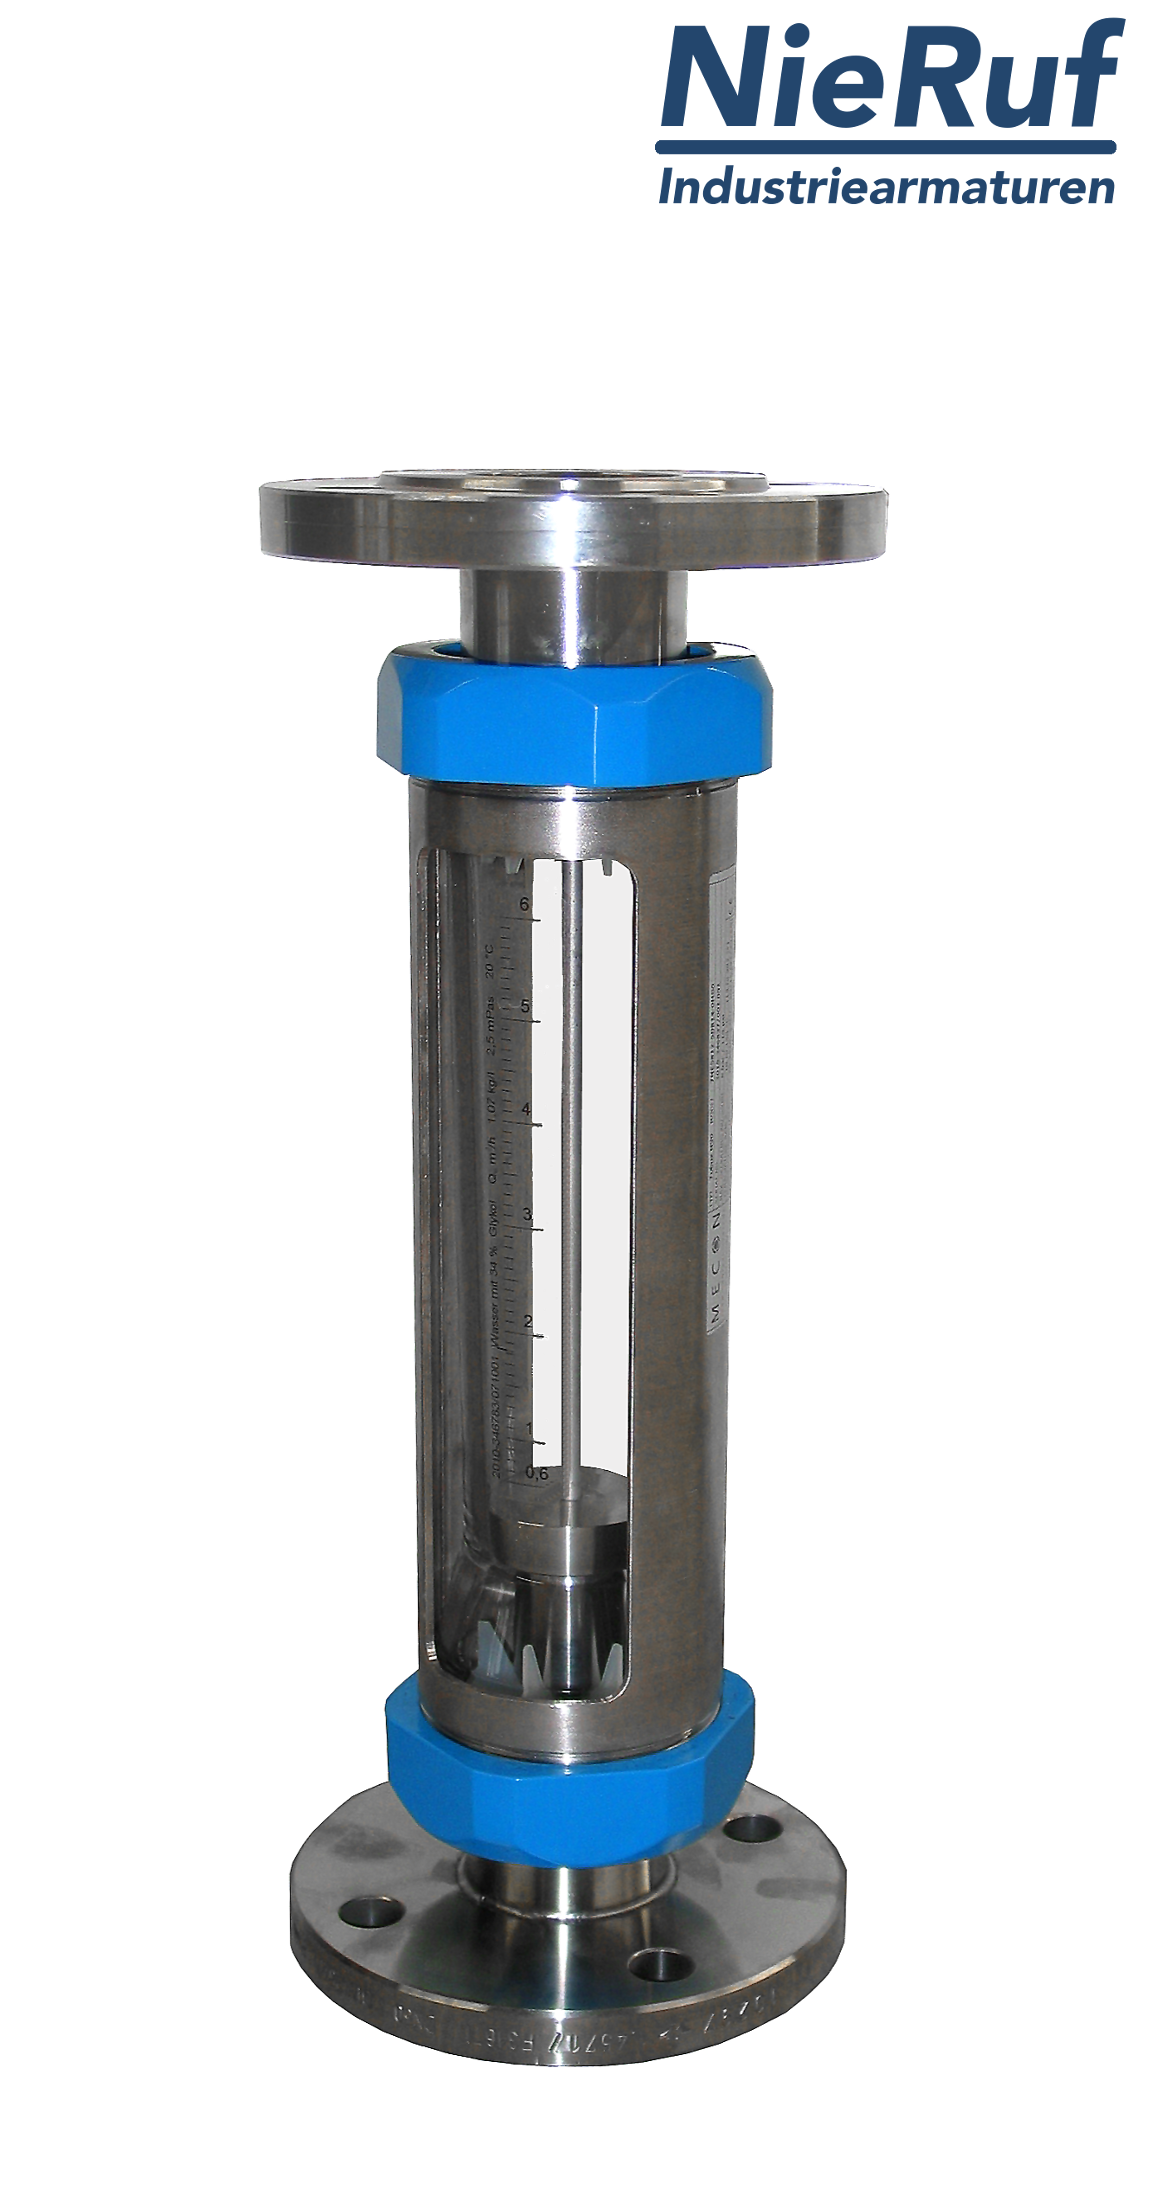 Variable area flowmeter stainless steel + borosilicate flange DN20 5.0 - 50.0 l/h water FKM